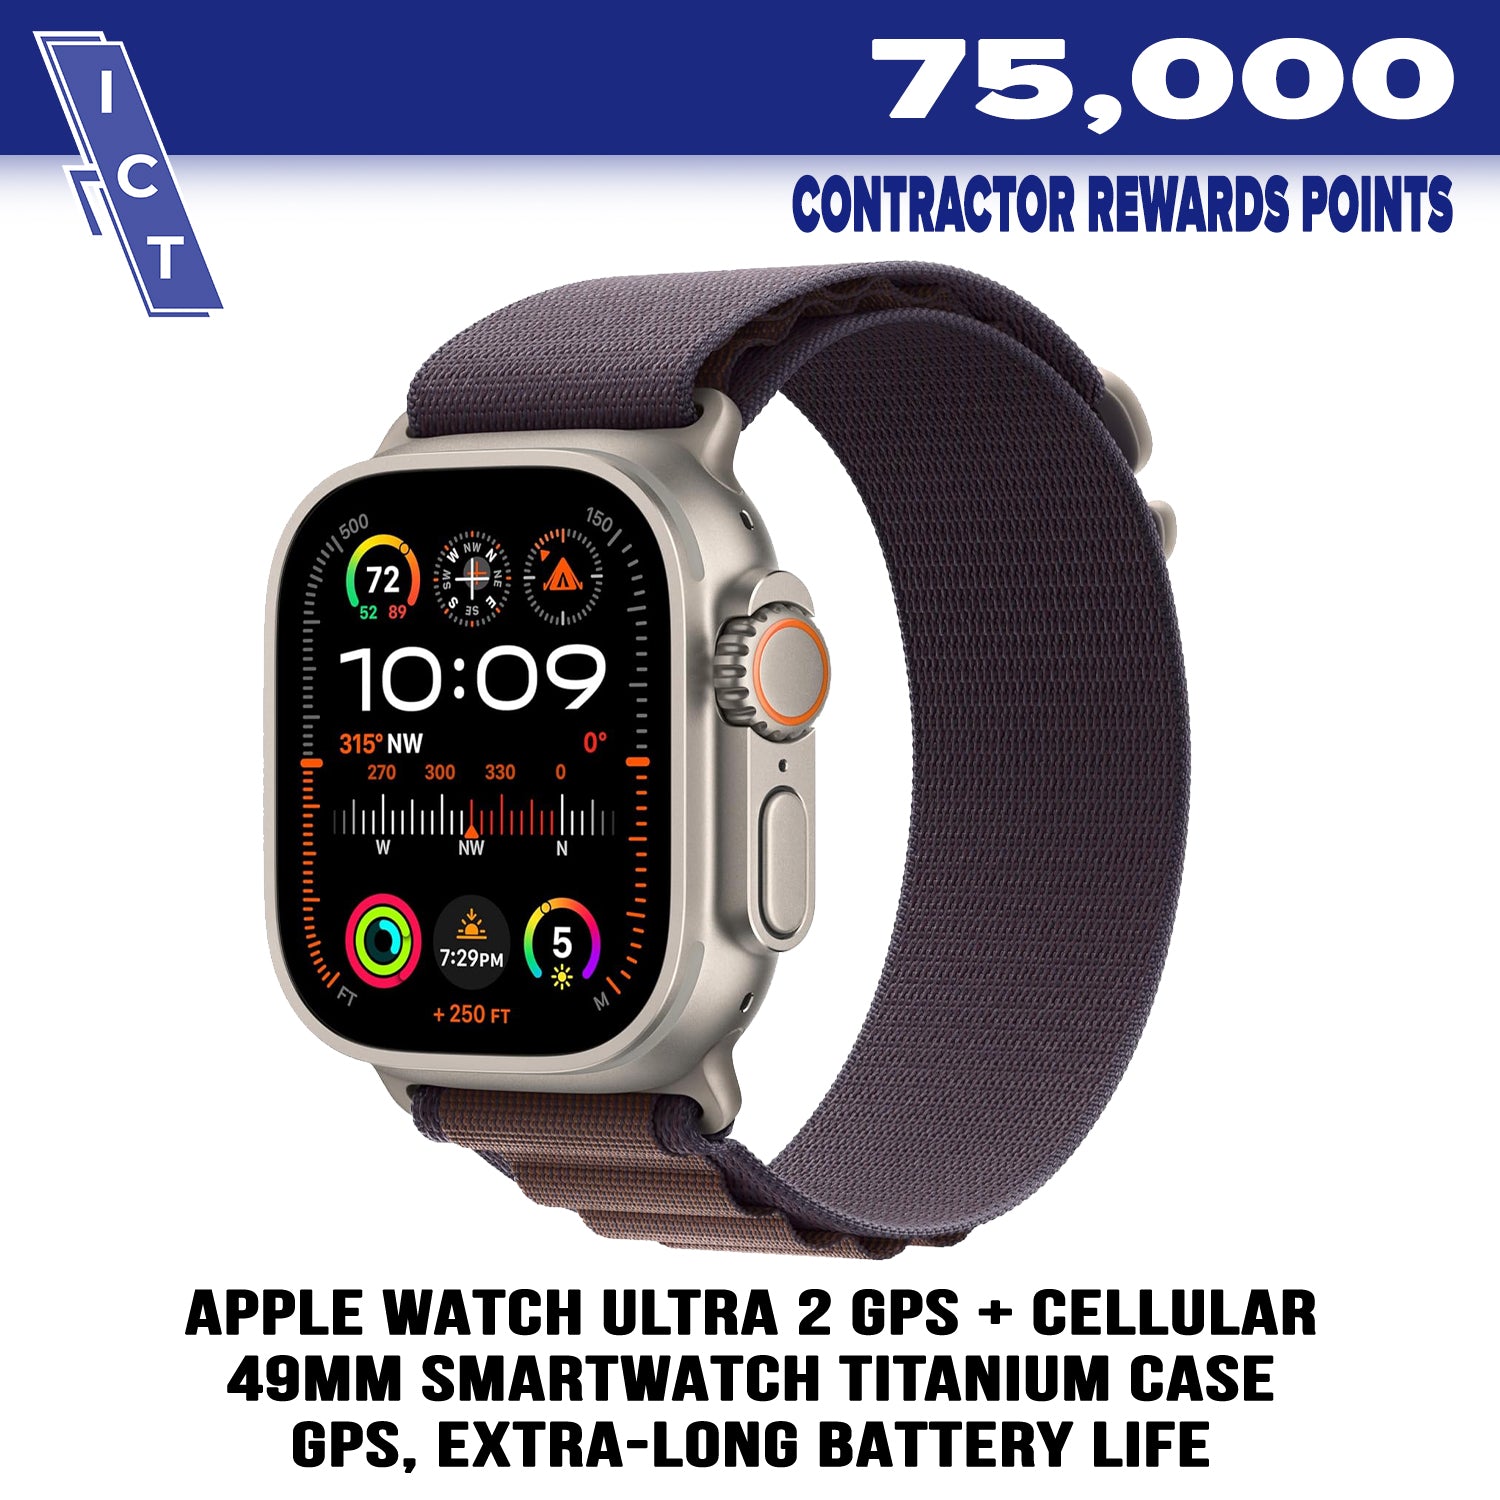 Apple Watch prize for 75000 points